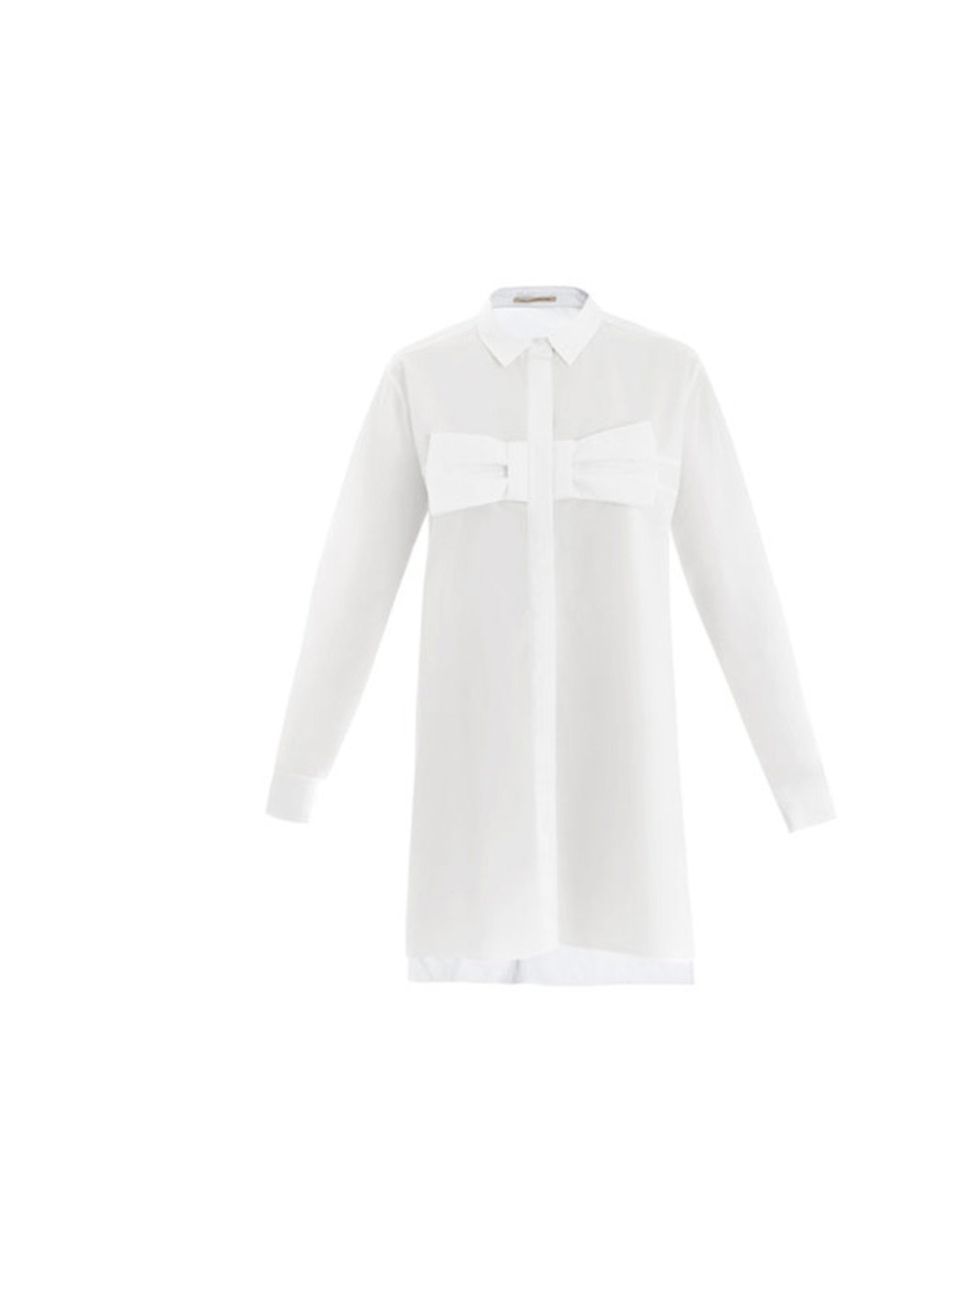 <p>Christopher Kane bow front shirt dress, £495, at Matches</p><p><a href="http://shopping.elleuk.com/browse?fts=christopher+kane+matches+shirt+dress">BUY NOW</a></p>